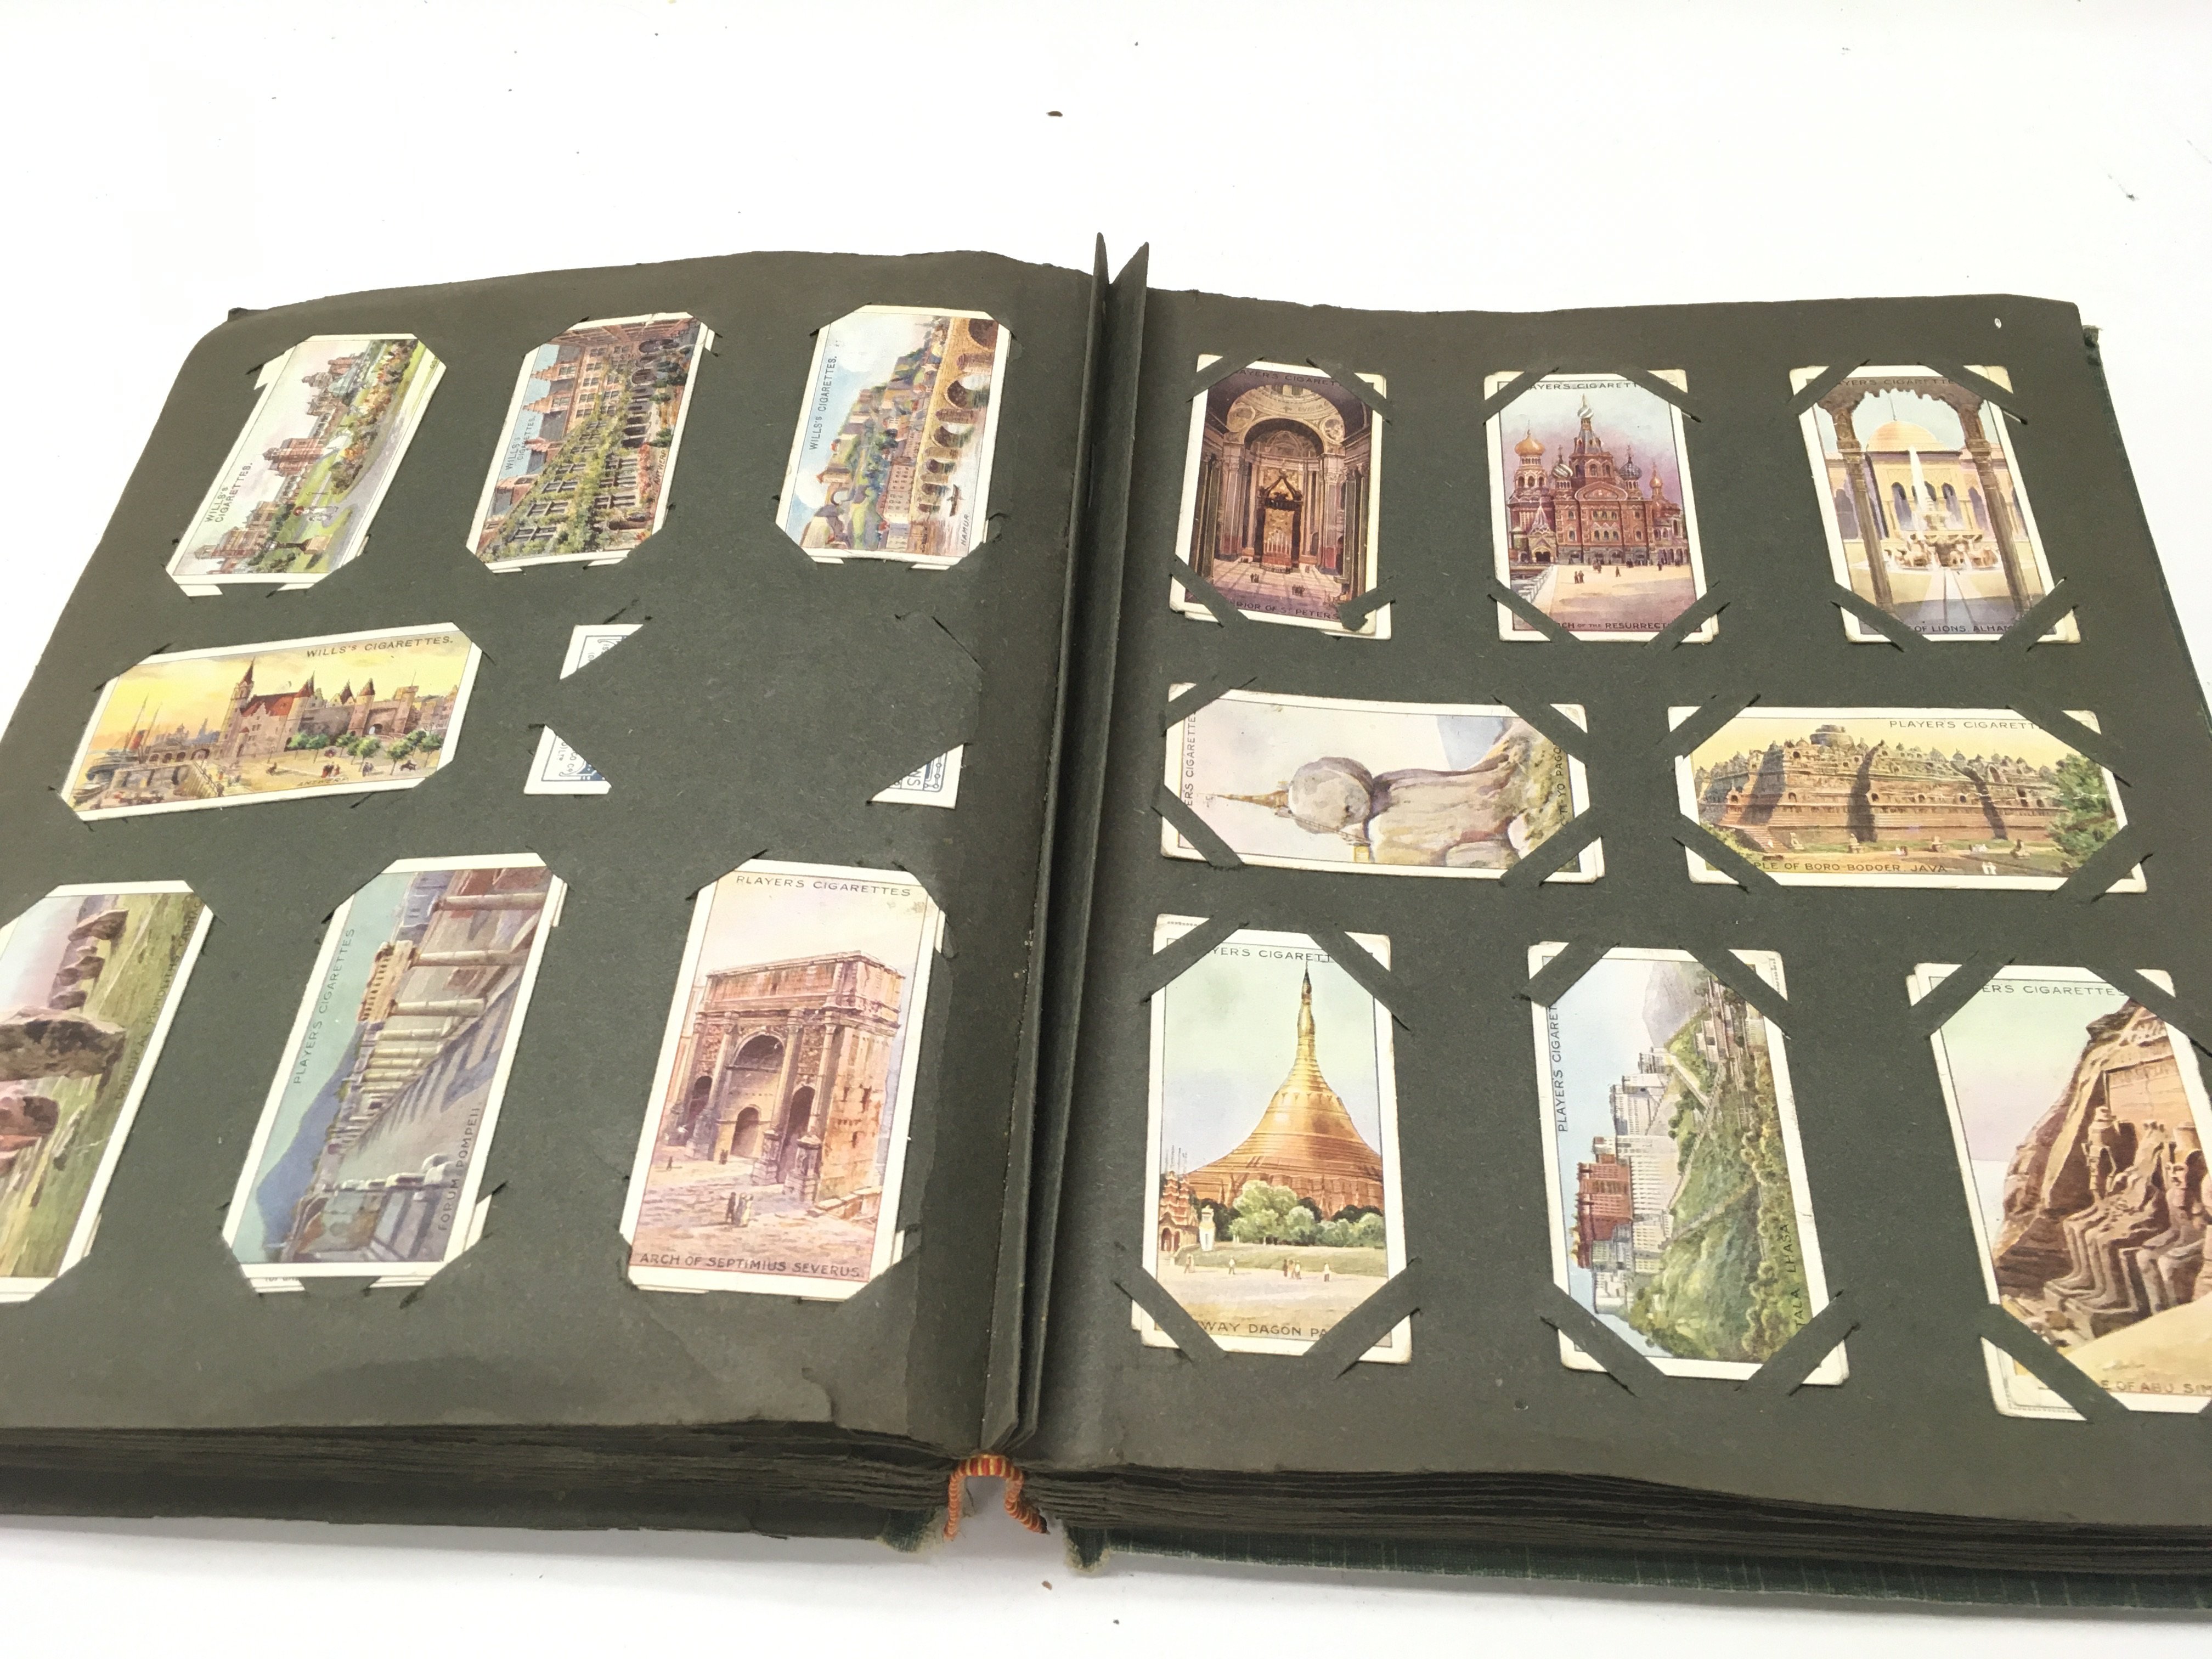 An album containing a large number of vintage cigarette cards. - Image 12 of 12